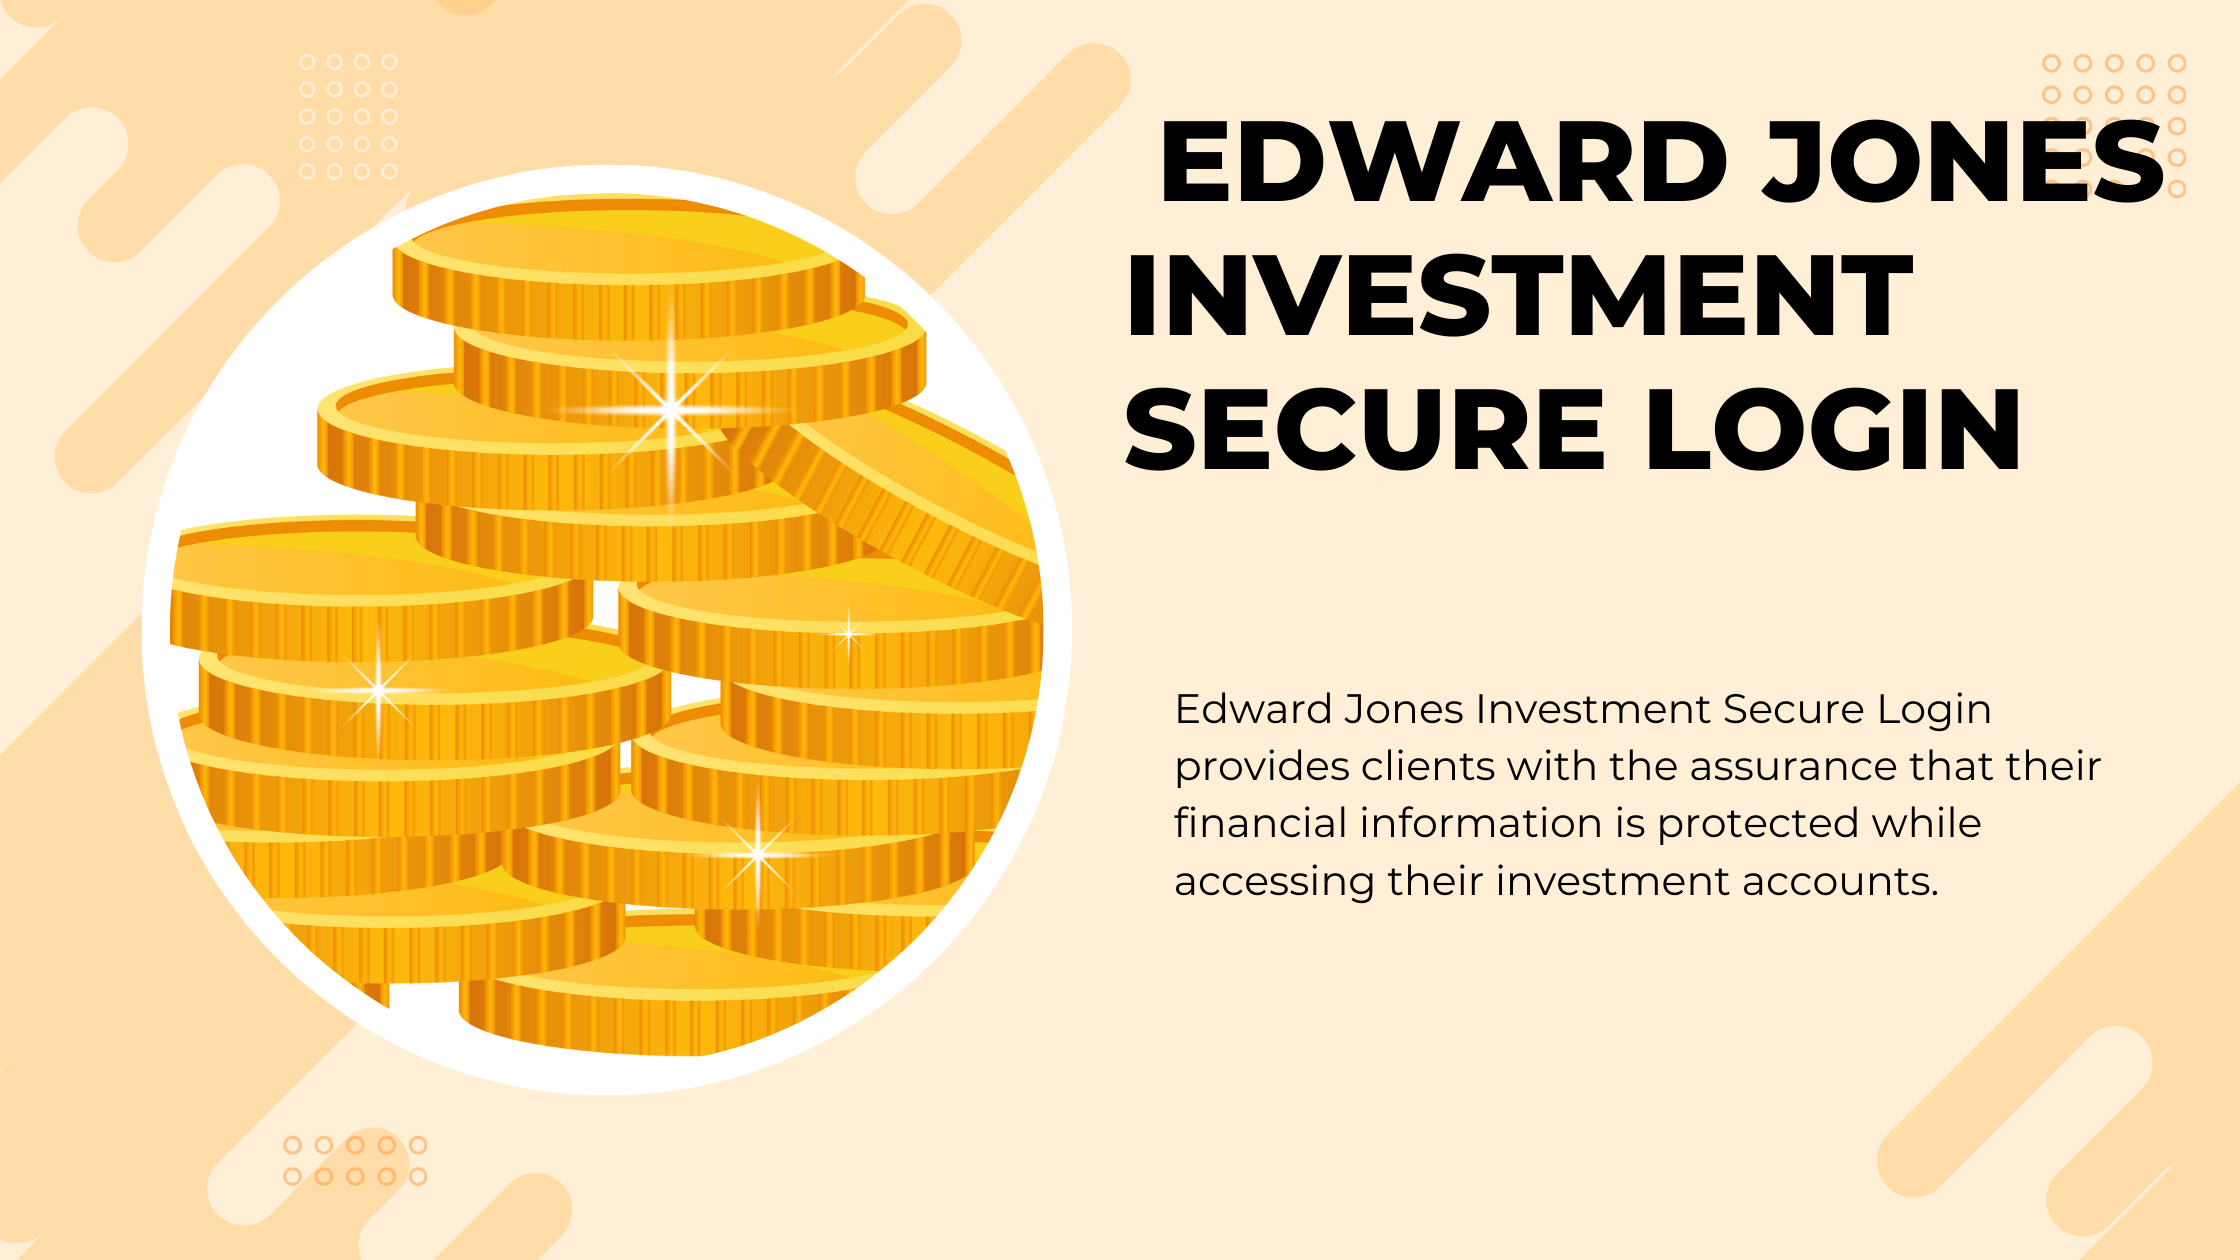 Empowering Financial Confidence: Edward Jones Investment Secure Login